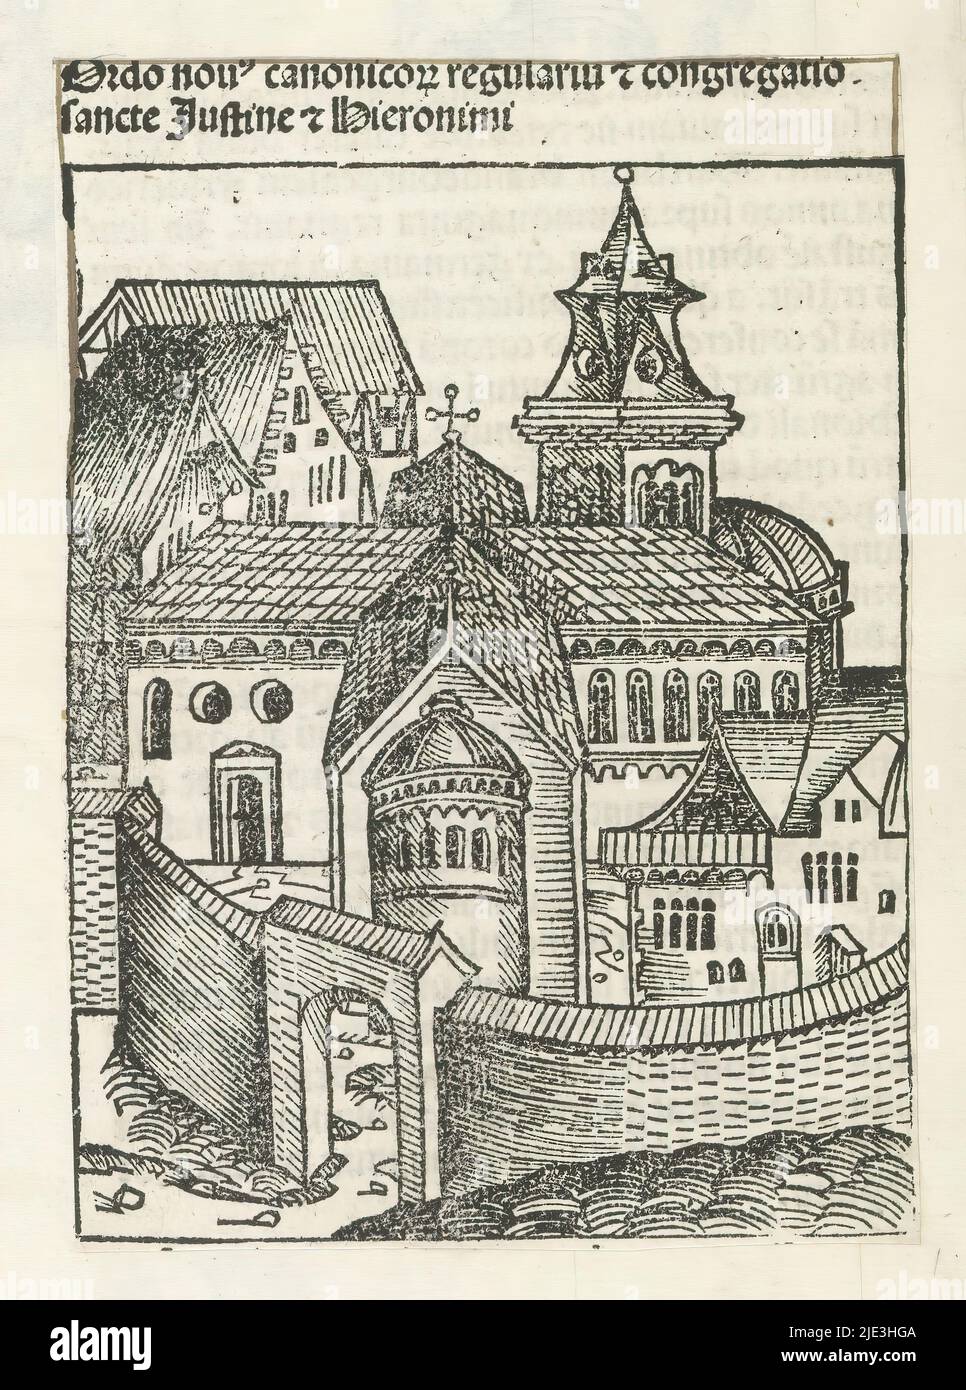 New Order of St. Justin and Hieronymus, Ordo novo canonicorum regularum et congregatio sancte Justine et Hieronimi (title on object), Liber Chronicarum (series title), A church and other buildings, situated within monastery walls. Used here as a depiction of the order of St. Justin and Hieronymus. The print is part of an album., print maker: Michel Wolgemut, (workshop of), print maker: Wilhelm Pleydenwurff, (workshop of), Neurenberg, 1493, paper, letterpress printing, height 155 mm × width 111 mm Stock Photo